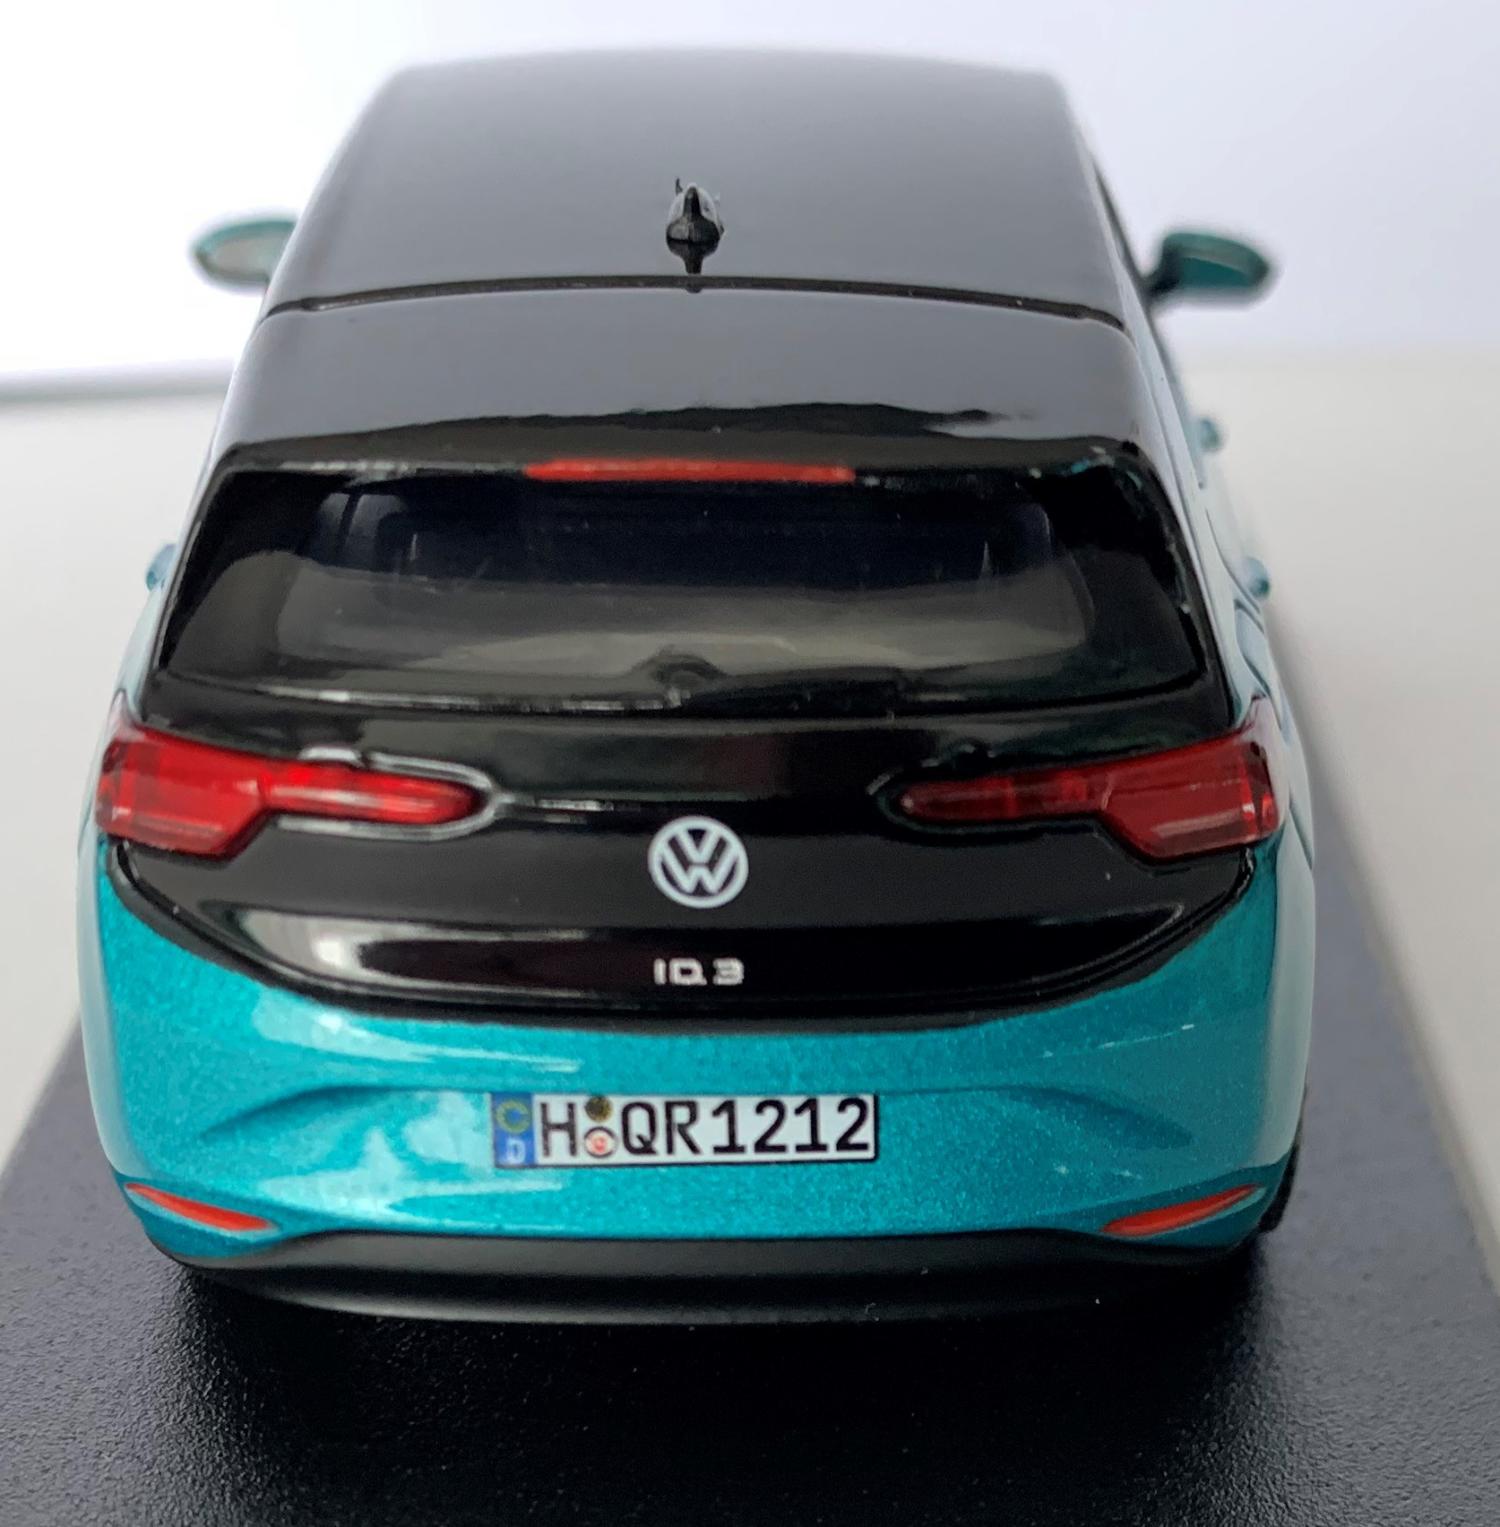 VW ID.3 2020 in turquoise 1:43 scale model from Norev